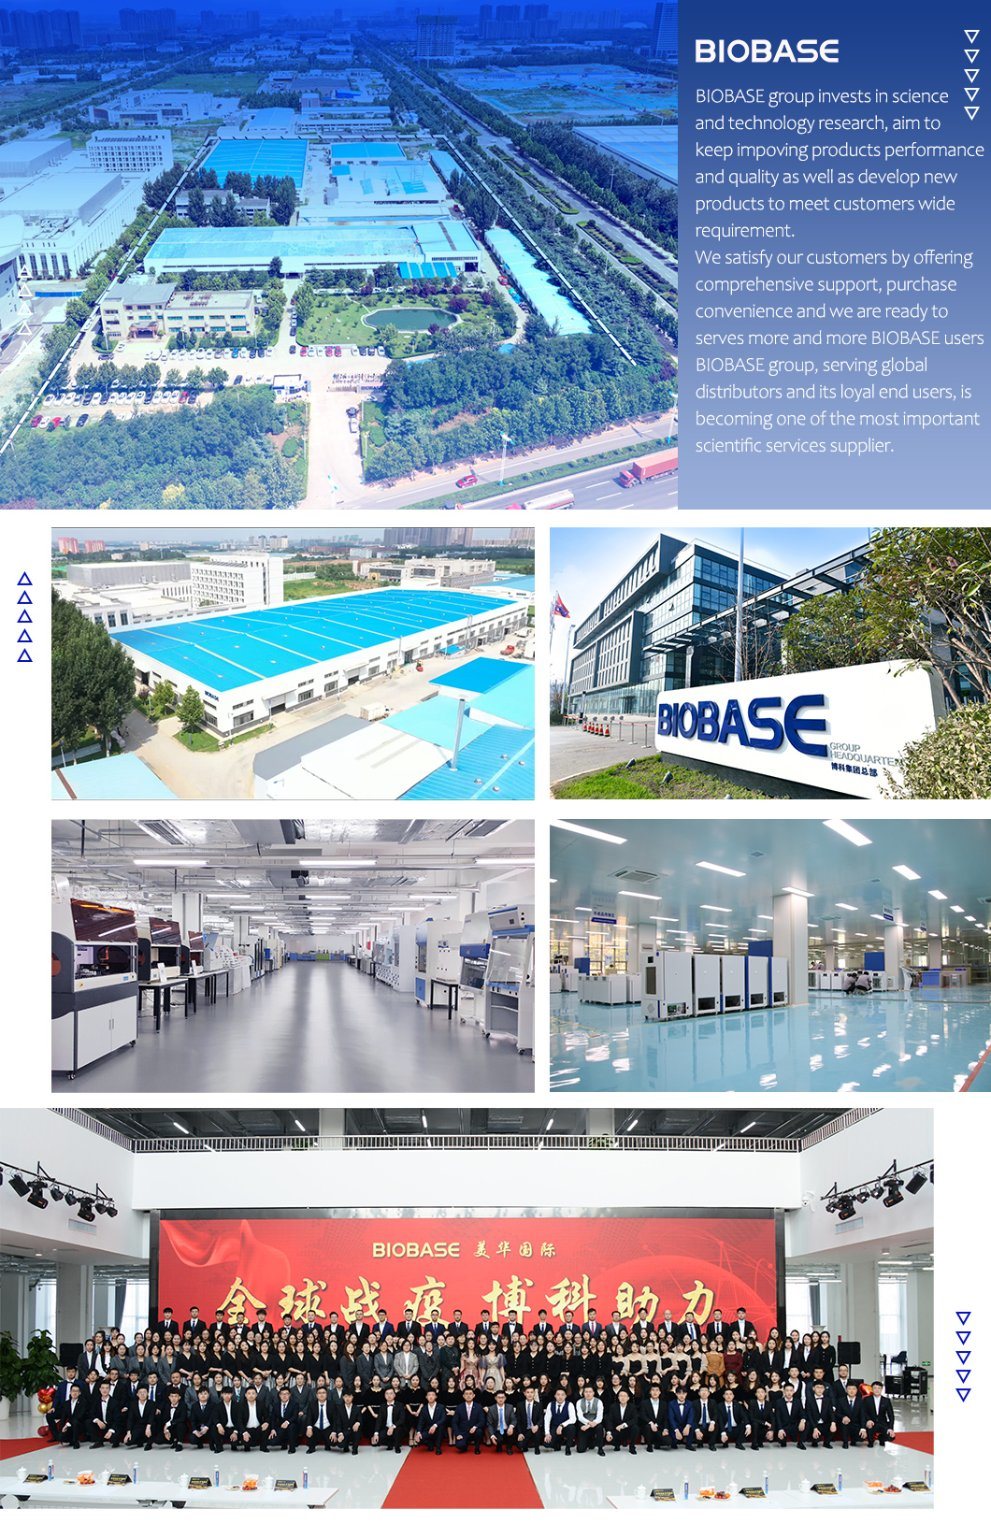 Biobase Sterilization Equipment Atomizing Disinfection Robot for Supermarket and Airport